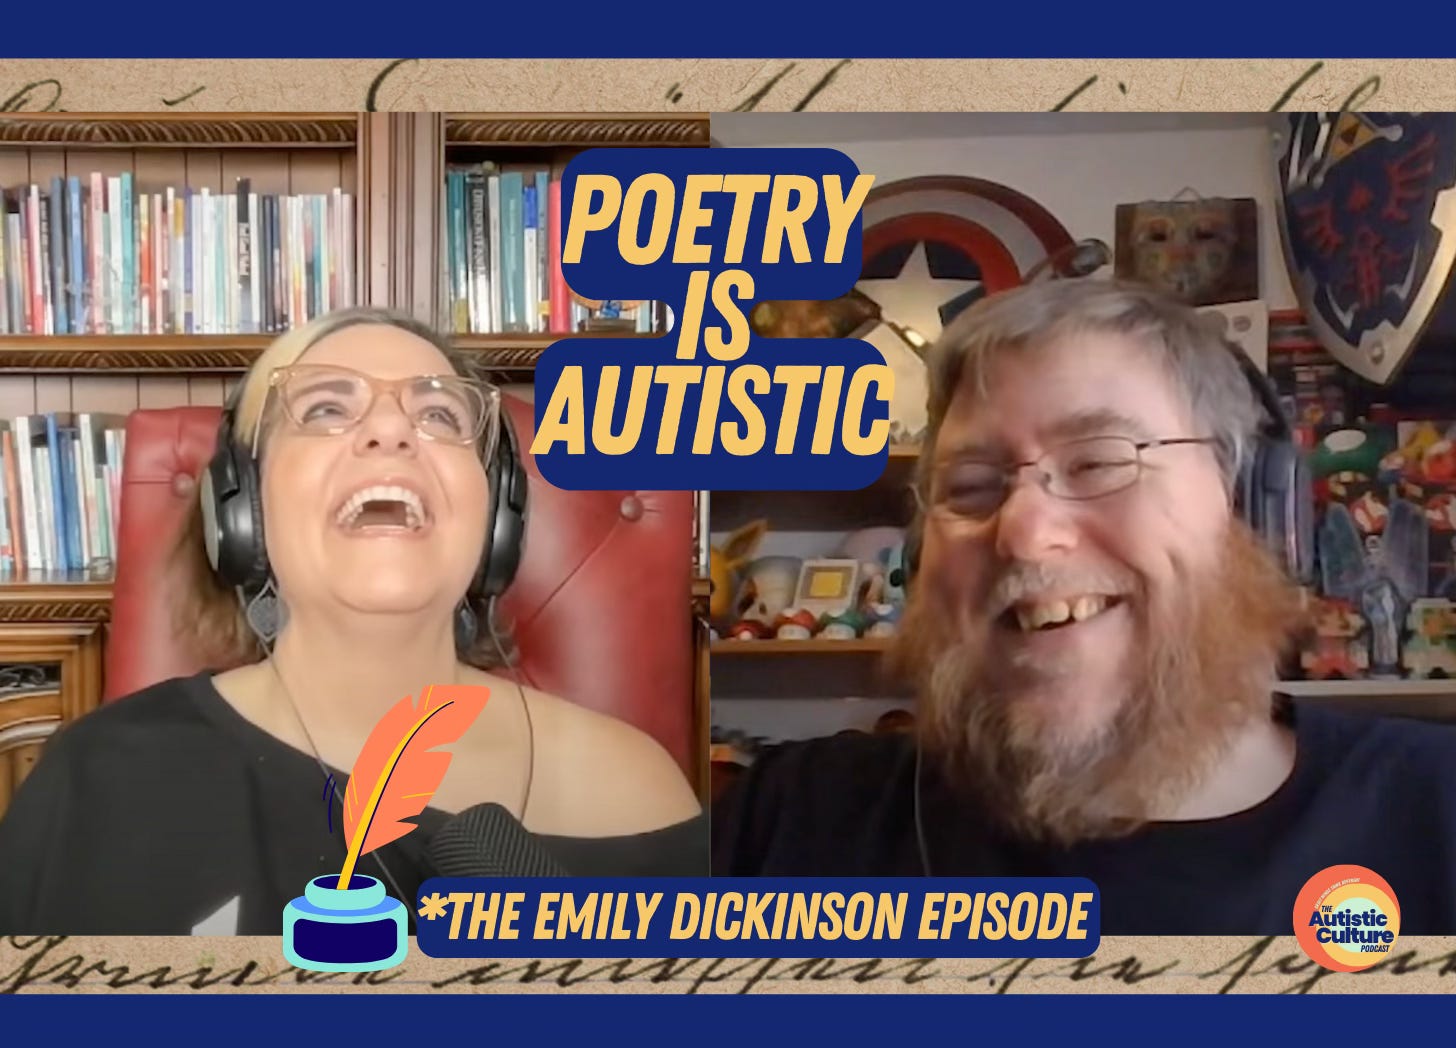 Listen to Autistic podcast hosts discuss: Poetry is Autistic | Autistic celebrities | Was Emily Dickinson Autistic? Have you wondered about autism symptoms in women?  Or Autistic artists from history?  What about Autistic authors?  We're talking all of that and more! Listen in to find out how Emily Dickinson (and her stellar autistic clothing) fits into Autistic Culture!